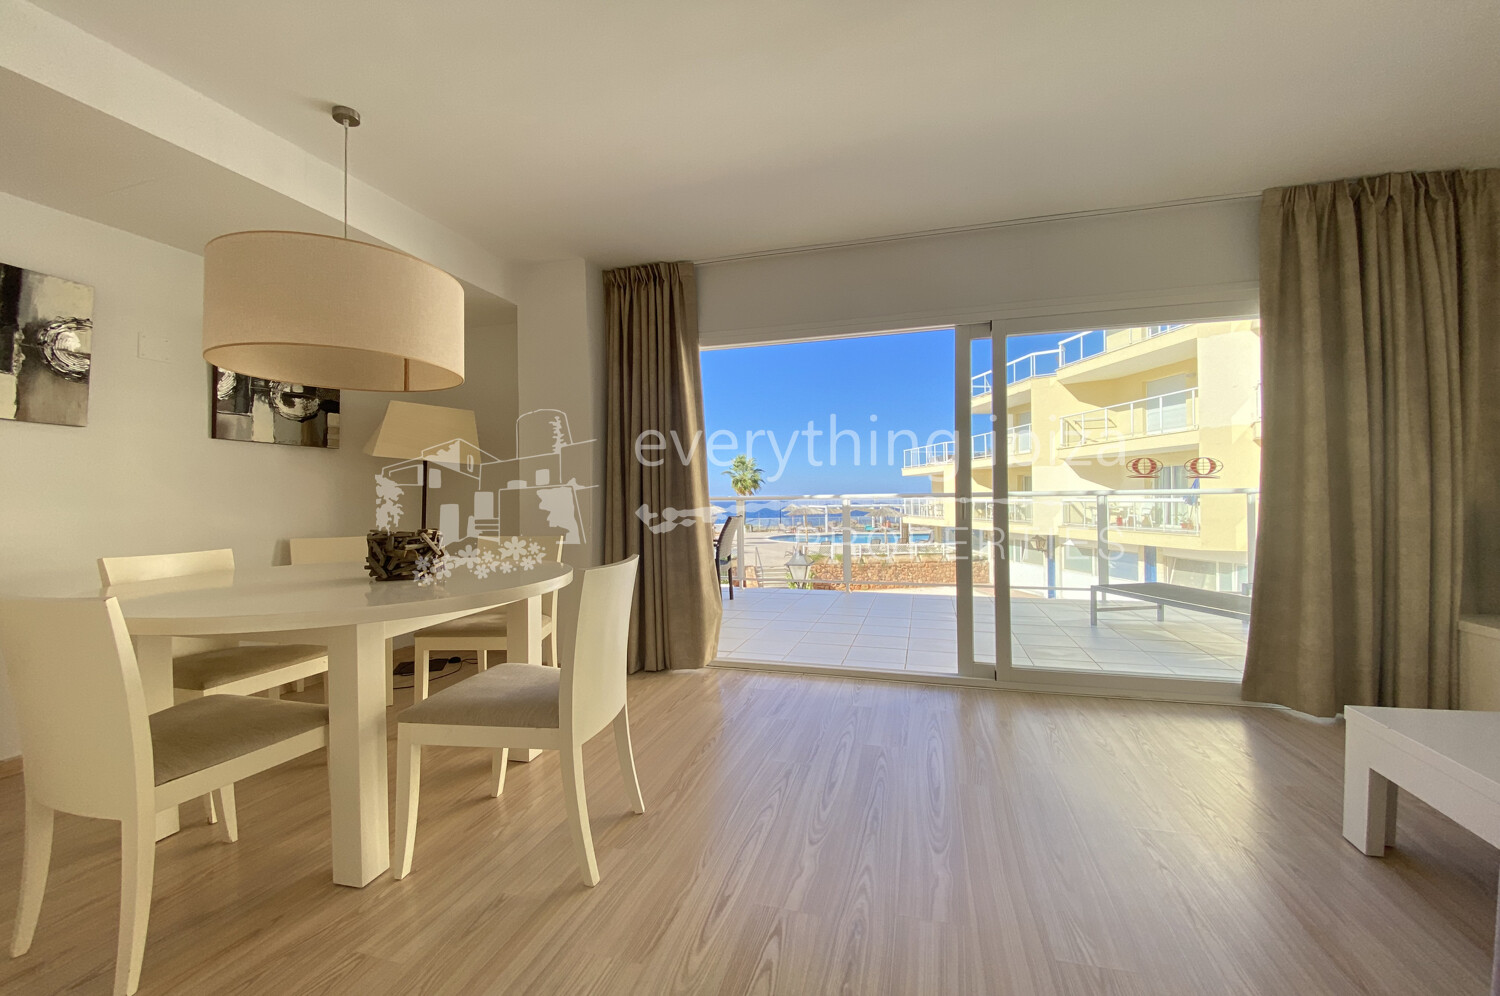 Modern, Spacious 3 Bed Apartment with Lovely Sea Views, ref. 1494, for sale in Ibiza by everything ibiza Properties